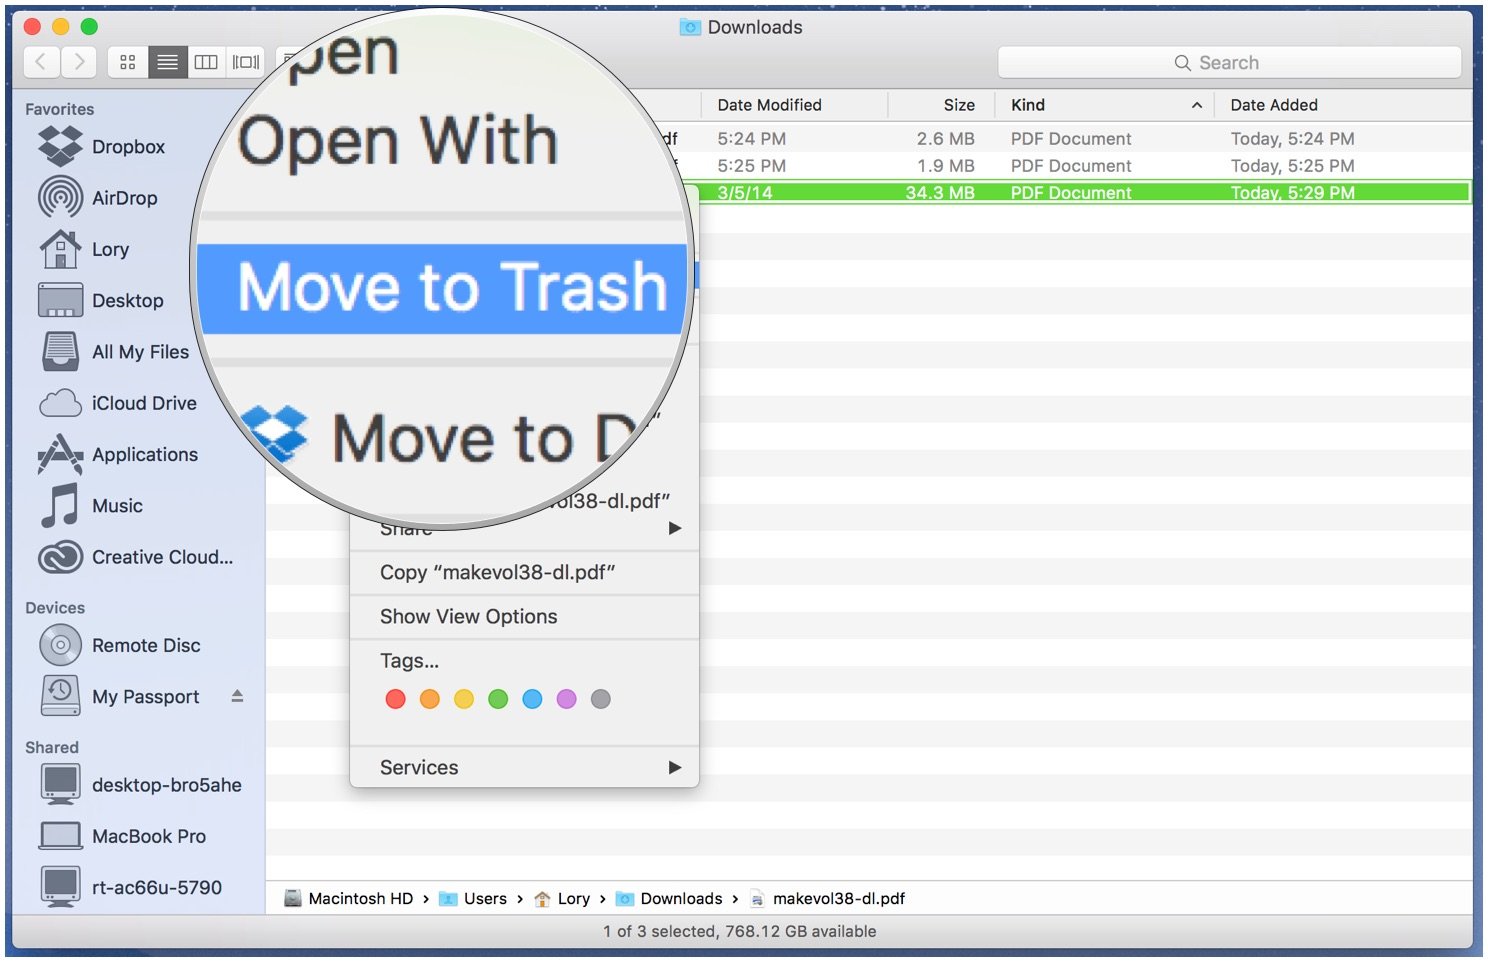 Deleting downloads on OS X